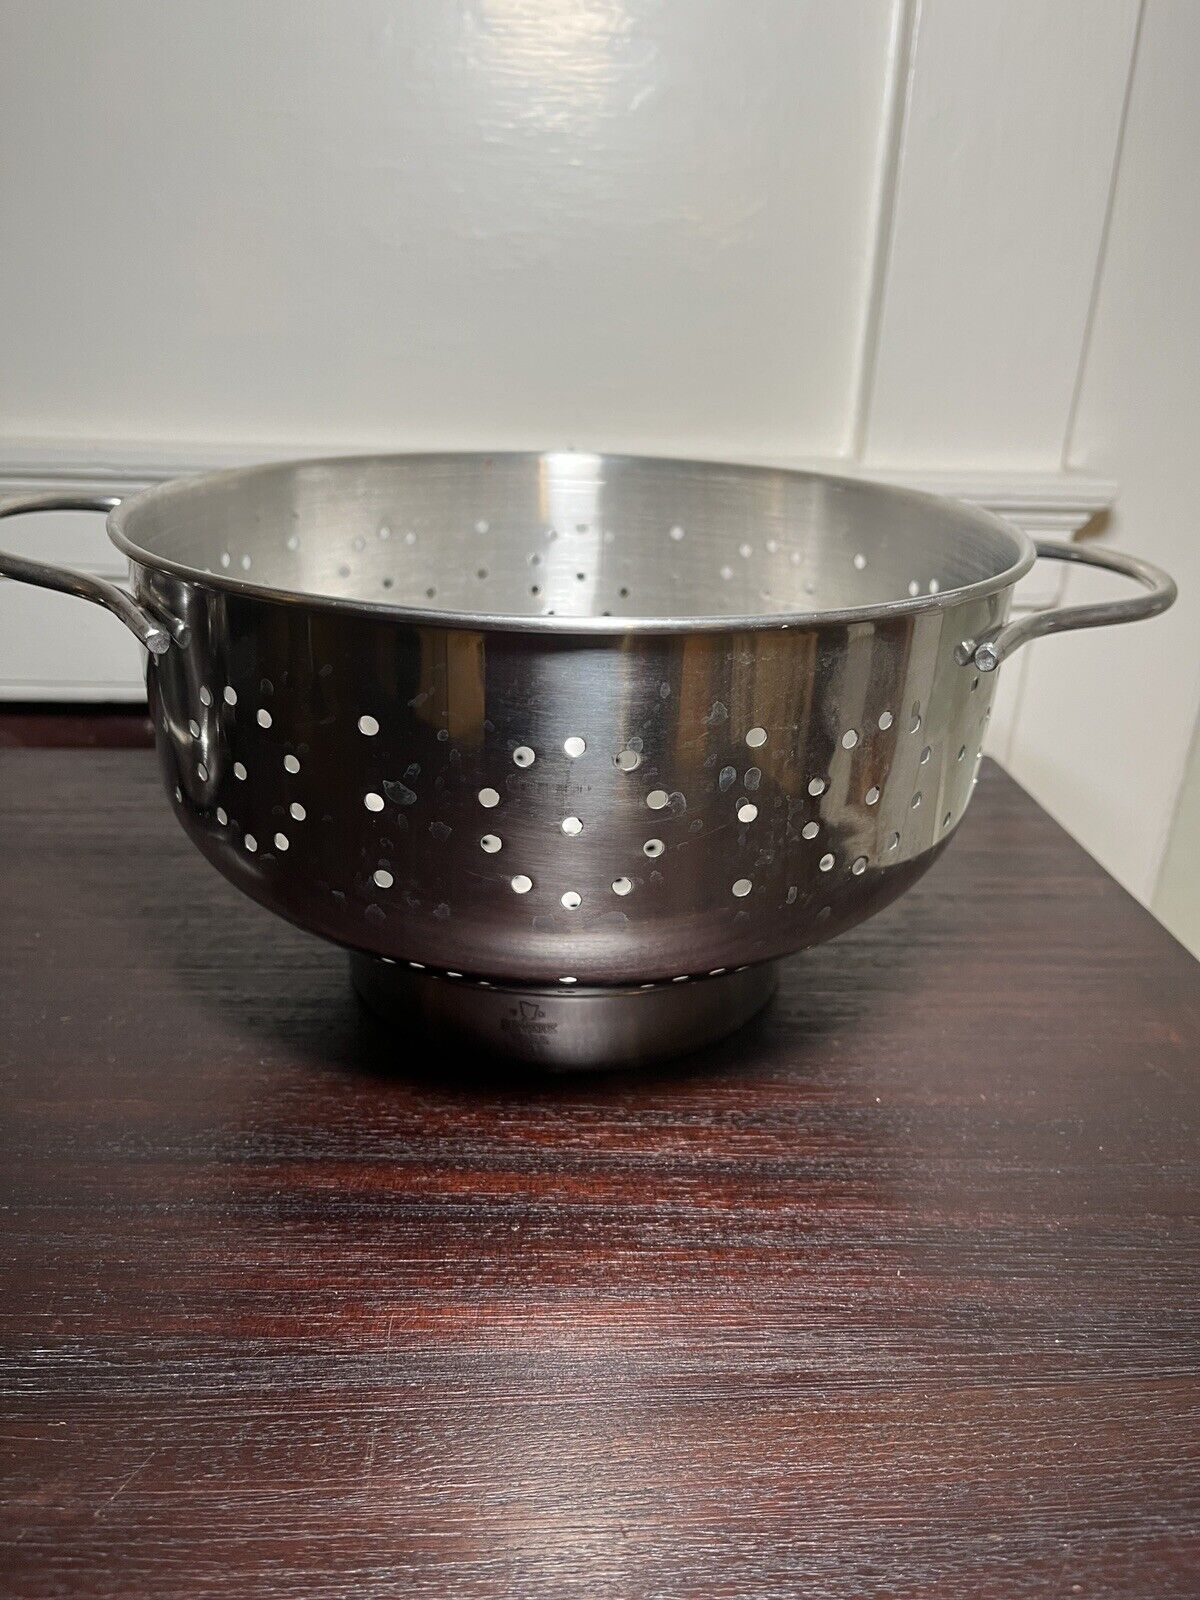 Revere Ware Colander-Cooking Accessory-Corning-Stainless Steel Strainer-NIB-SOS